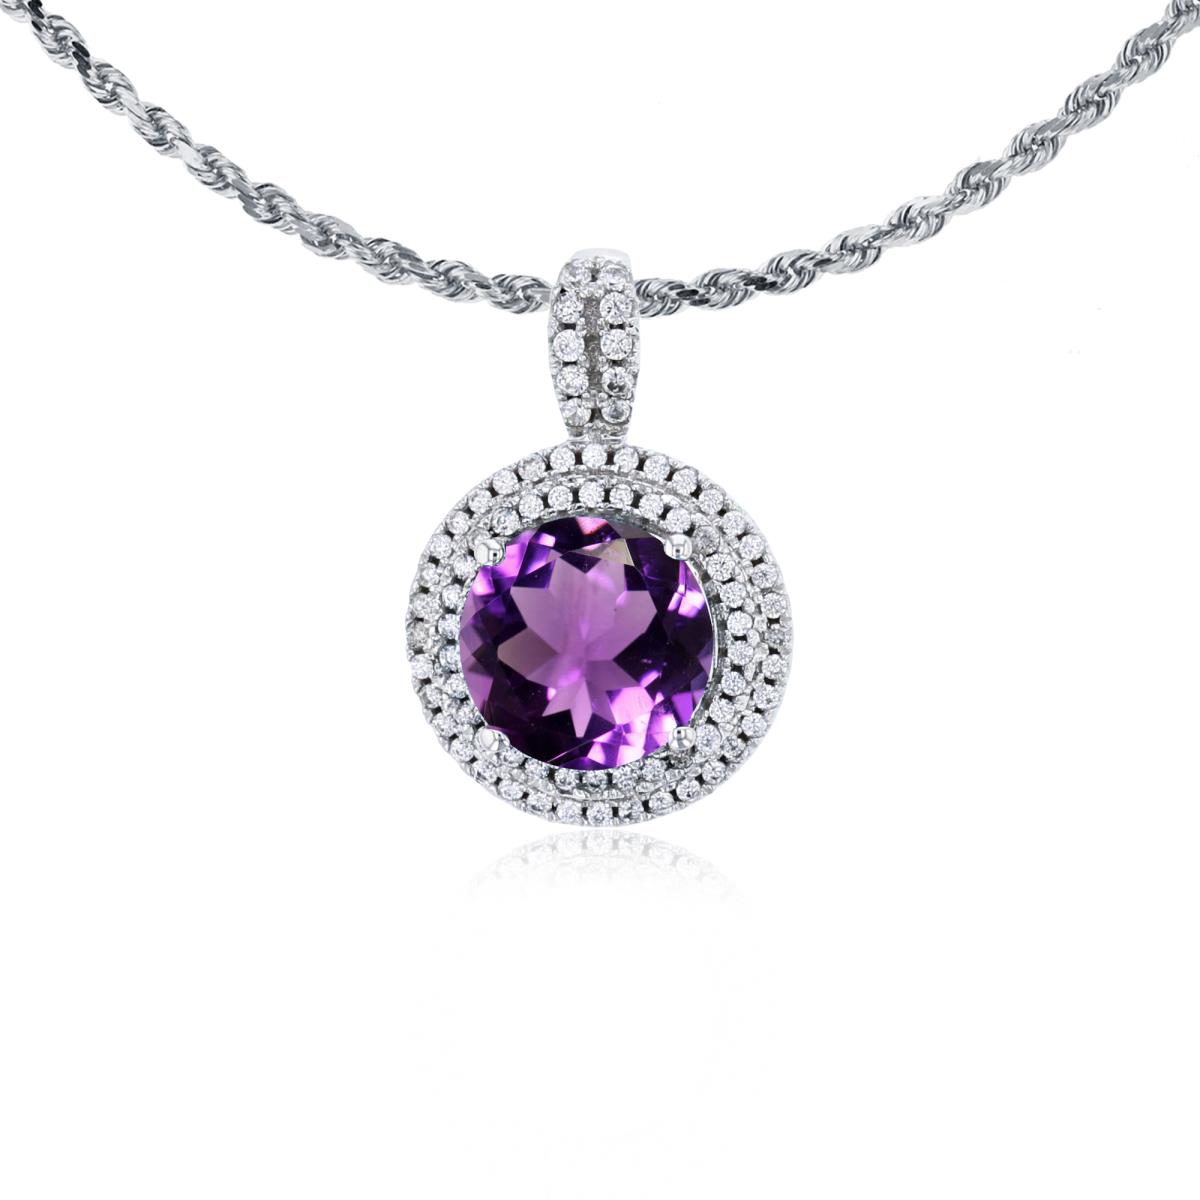 14K White Gold 7mm Round Amethyst & 0.25 CTTW Diamonds Double Halo 18" Rope Chain Necklace